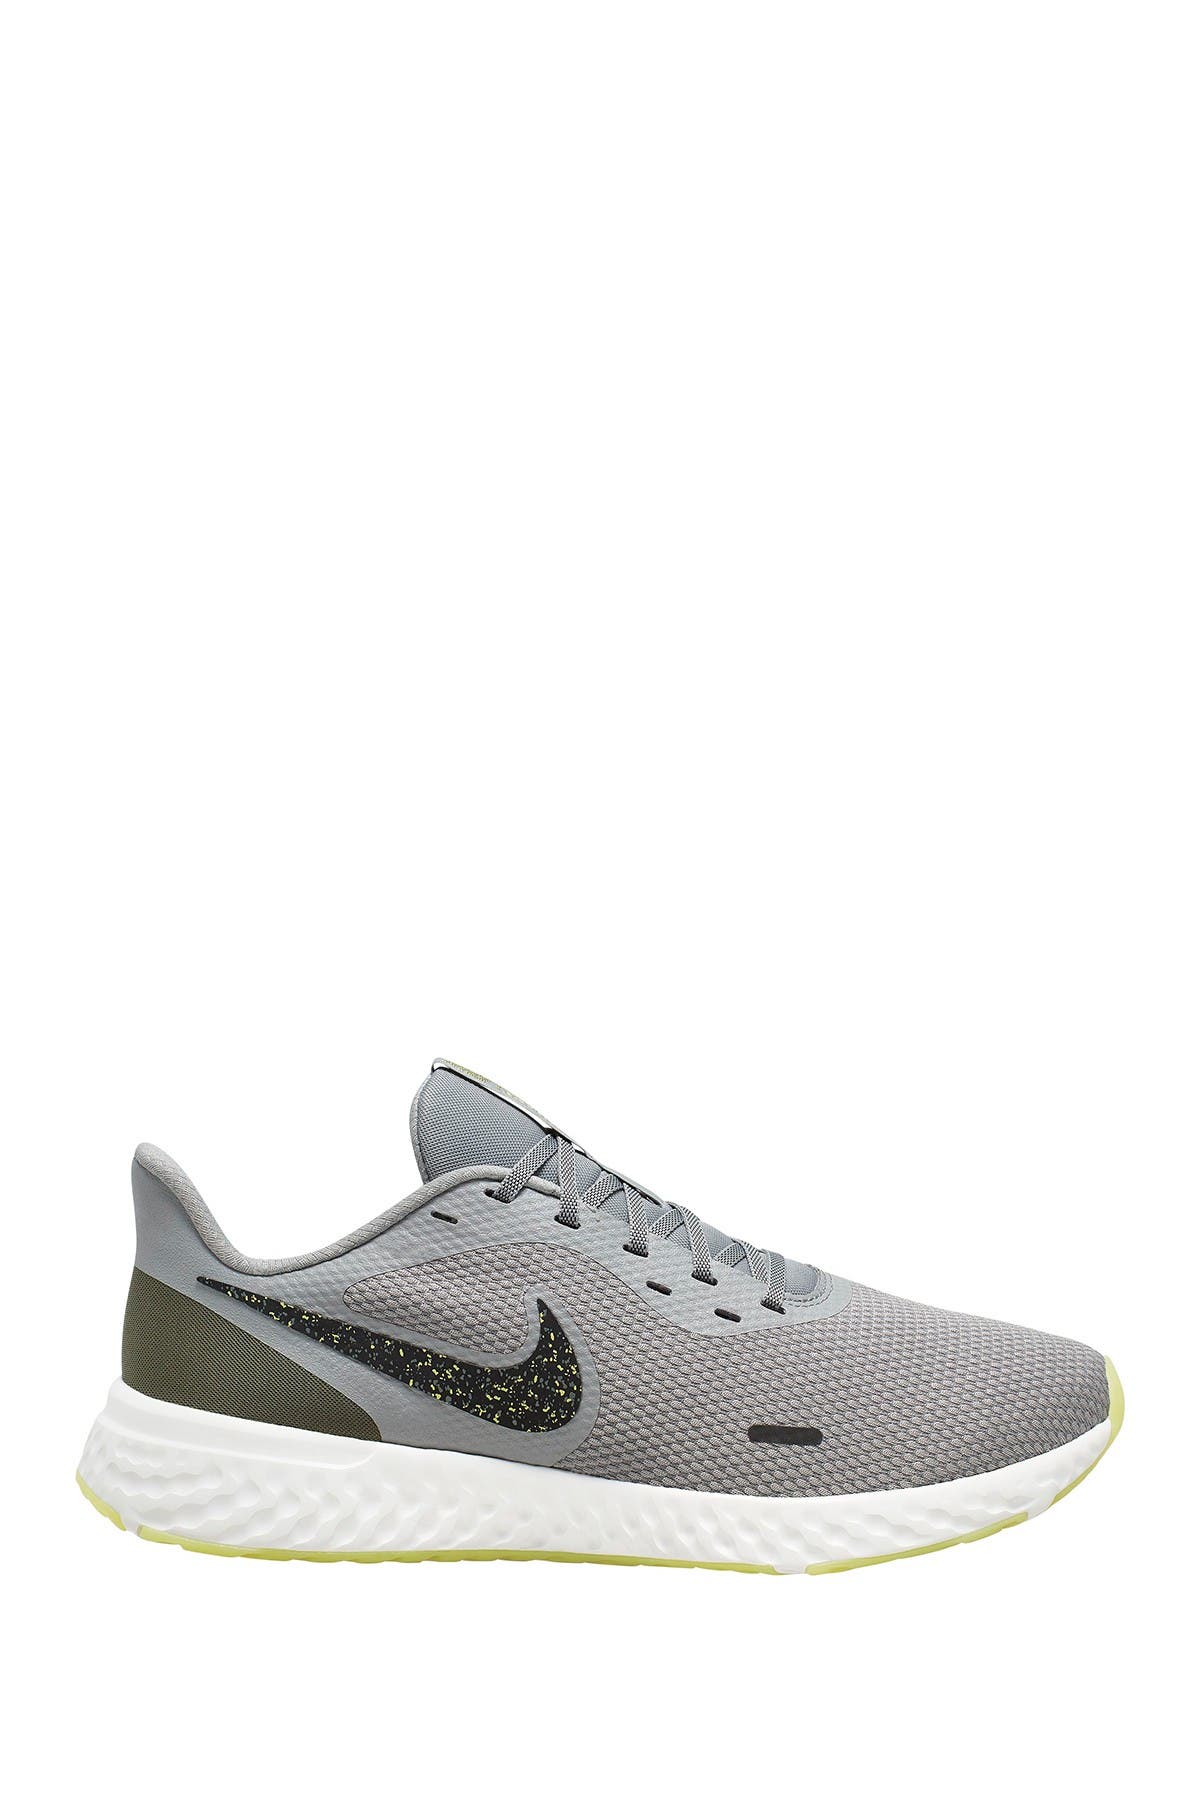 nike revolution 5 special edition women's running shoes